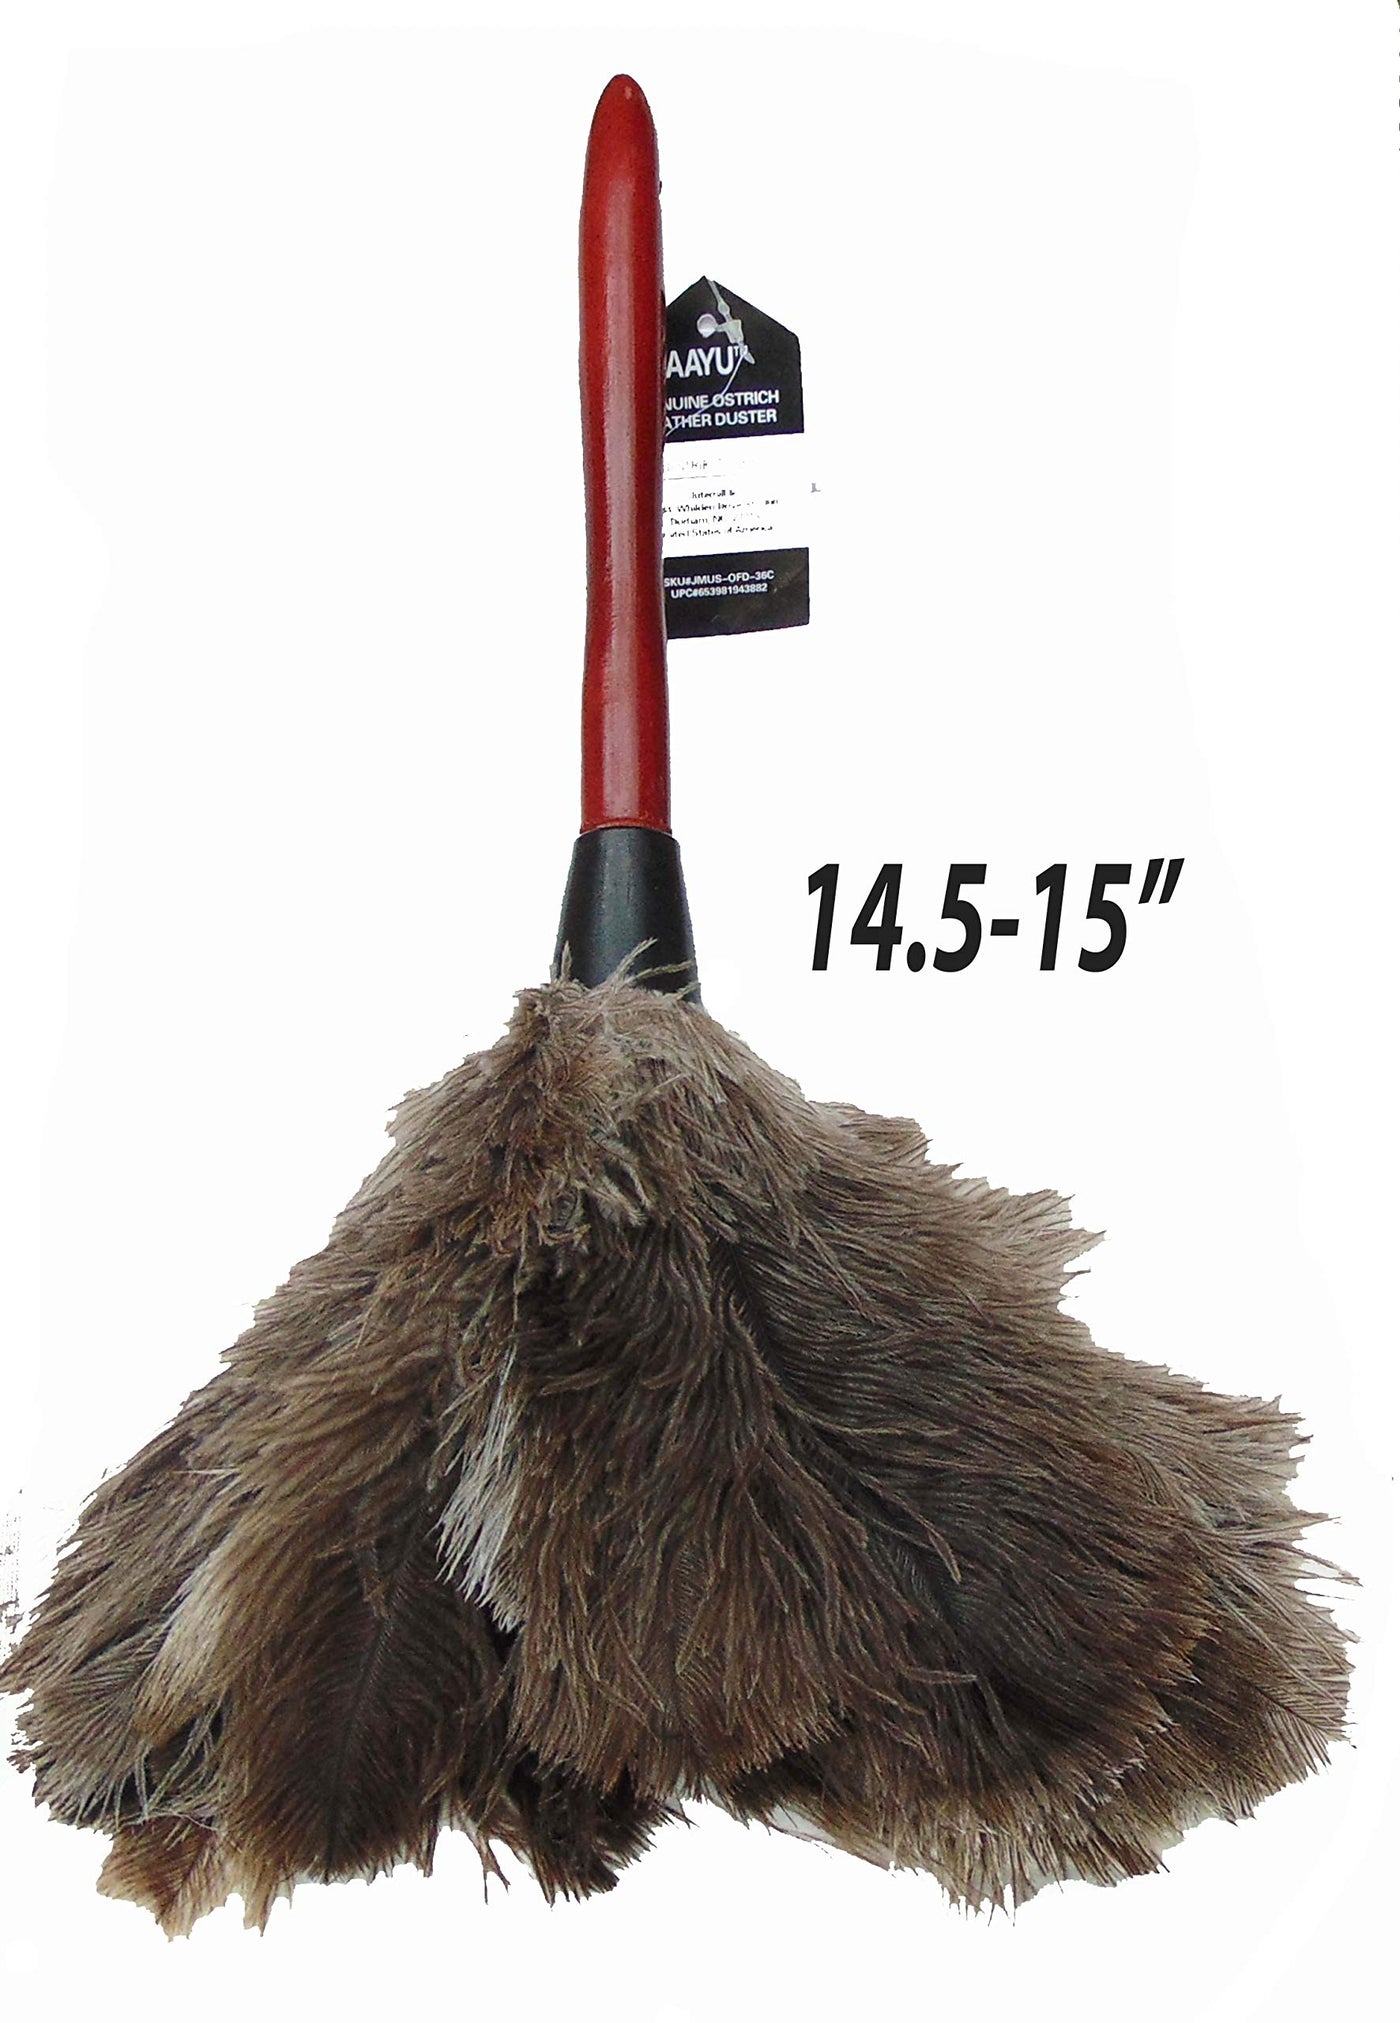 AAYU Premium Professional Feather Duster (36cm) | Feather Moping and Cleaning Accessories | Eco-Friendly Genuine Ostrich Feather Duster with Wooden Handle | Easy to Clean and Reuse